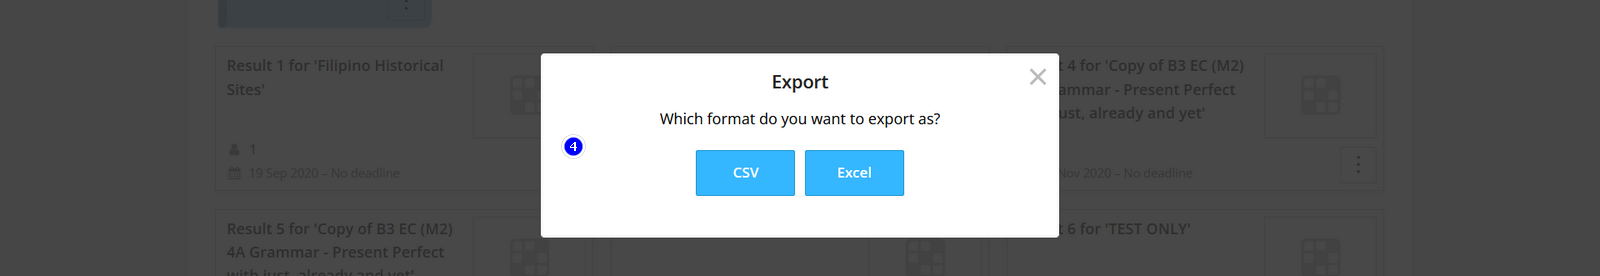 export_results_2.png